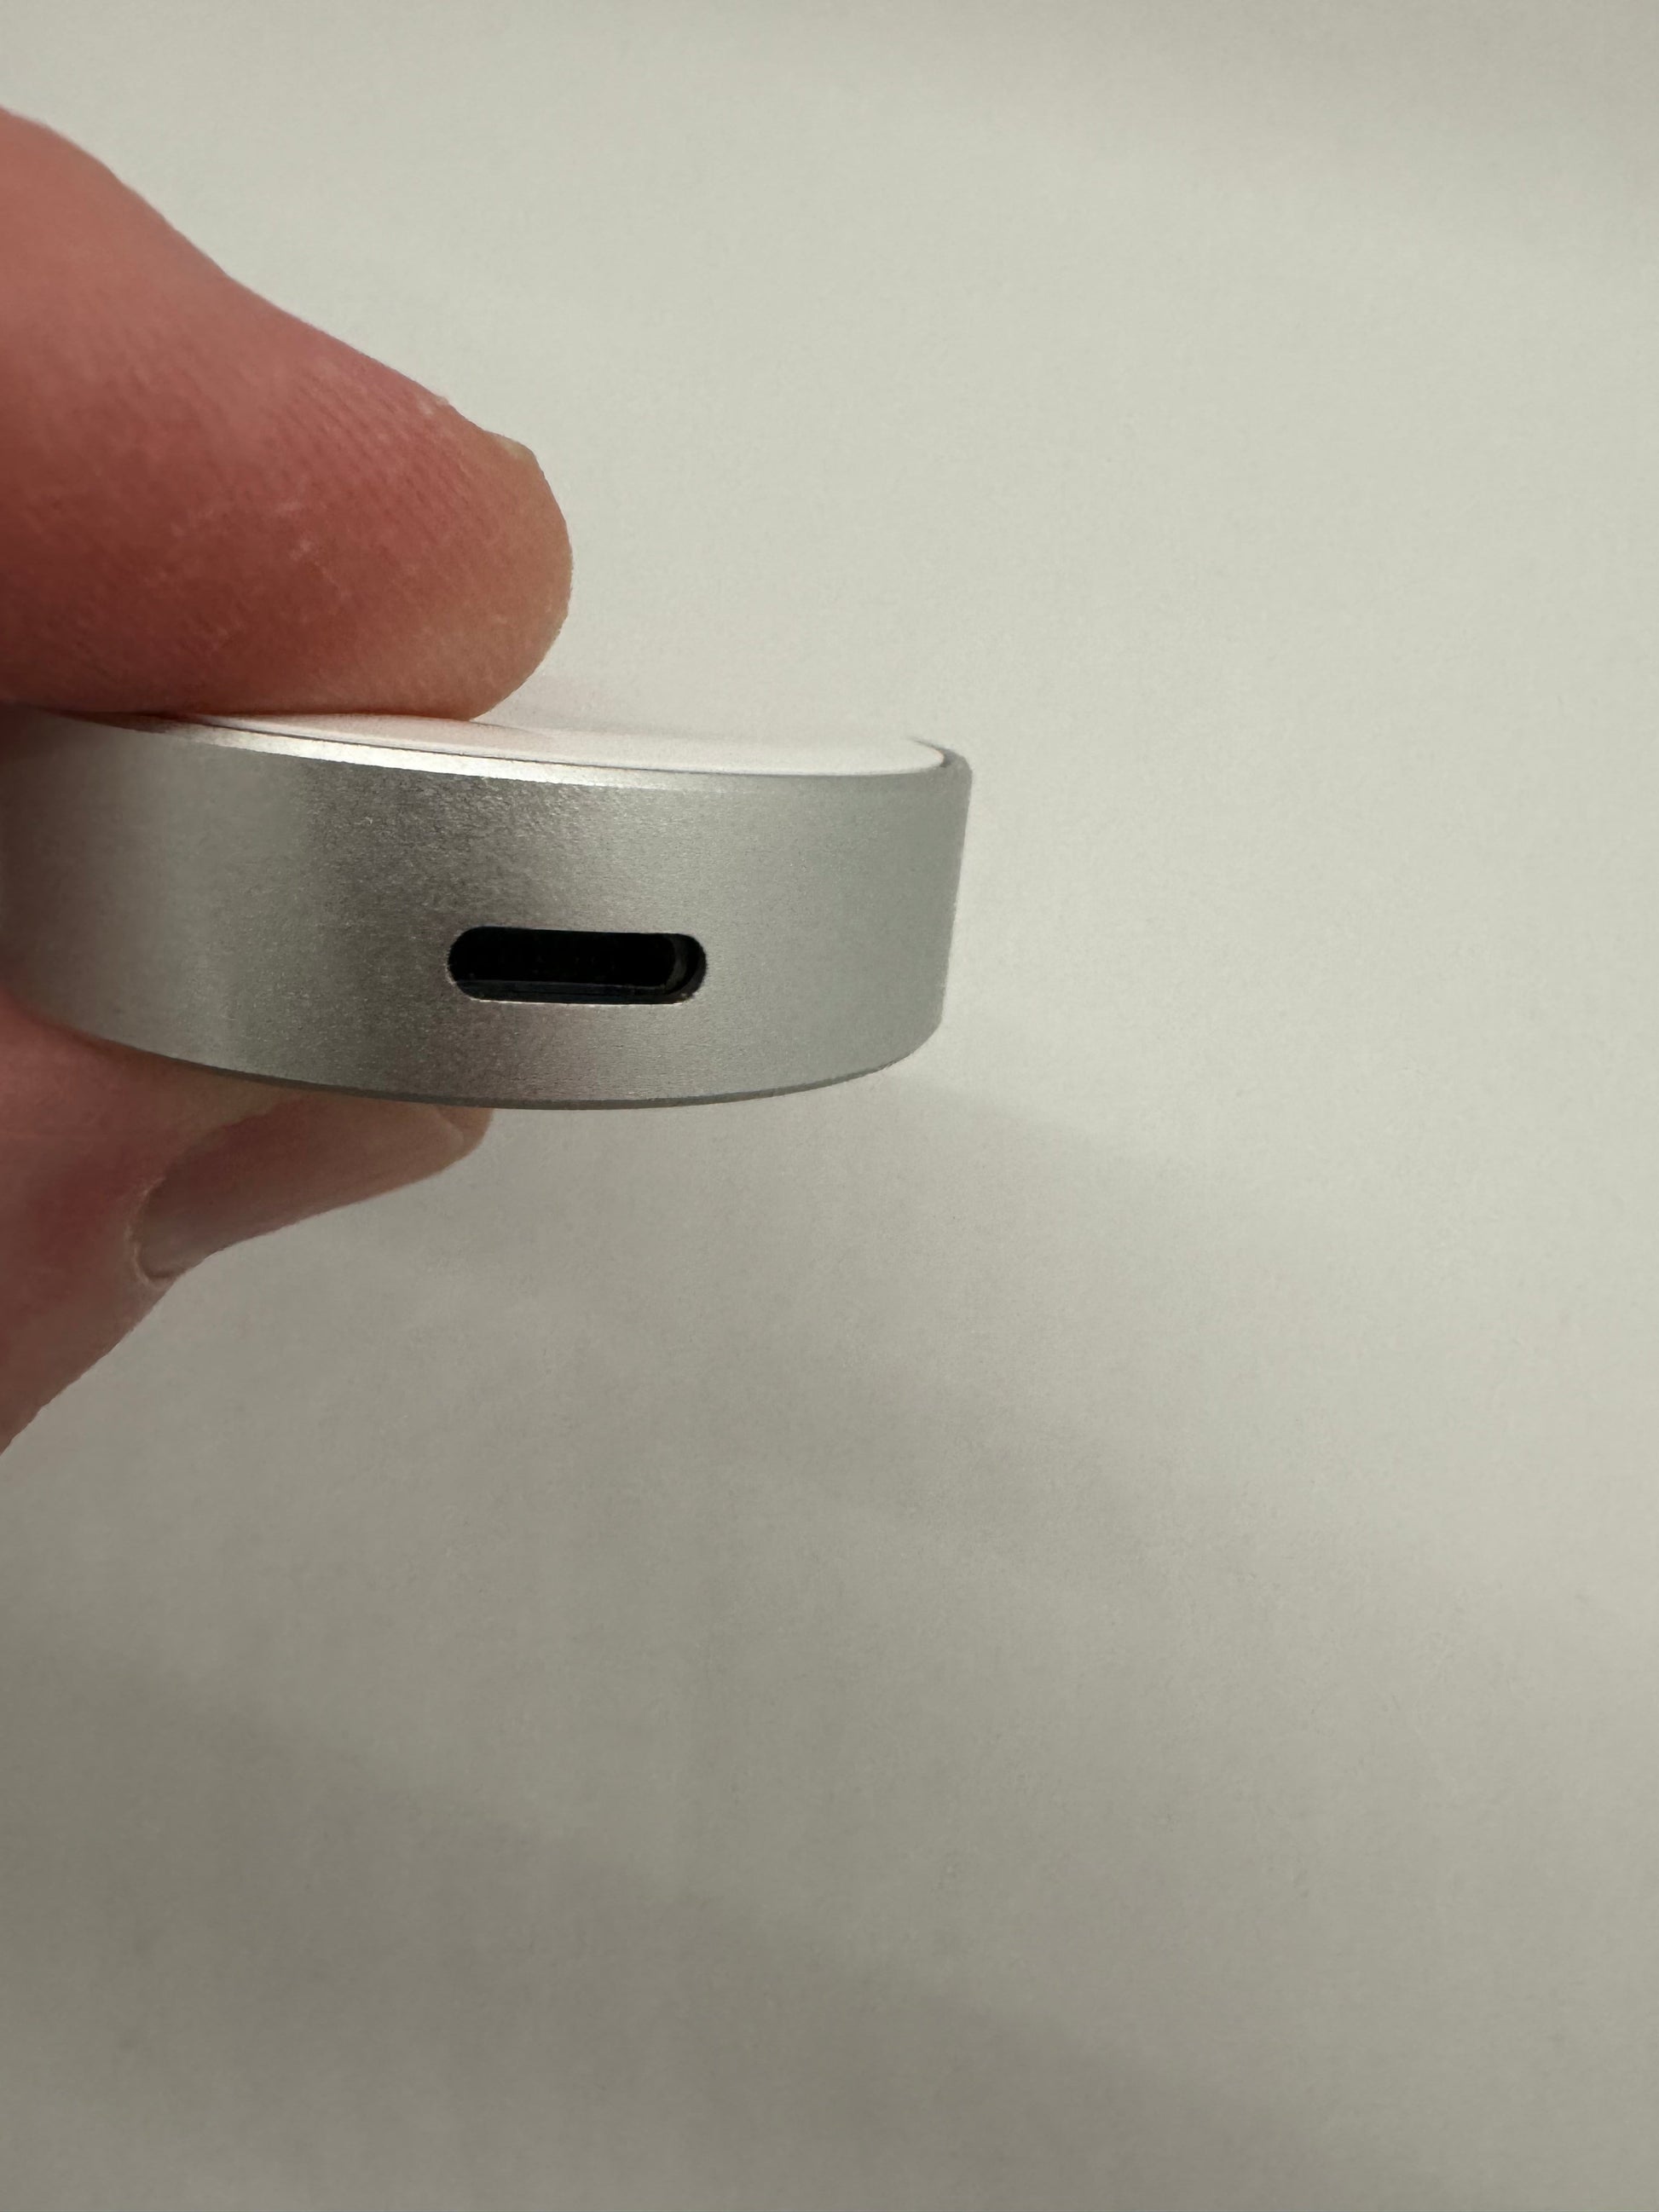 Be My AI: The picture shows a close-up of a person's fingers holding a small, silver, circular device. The device appears to be made of metal and has a single rectangular port on its side. The background is plain and white.